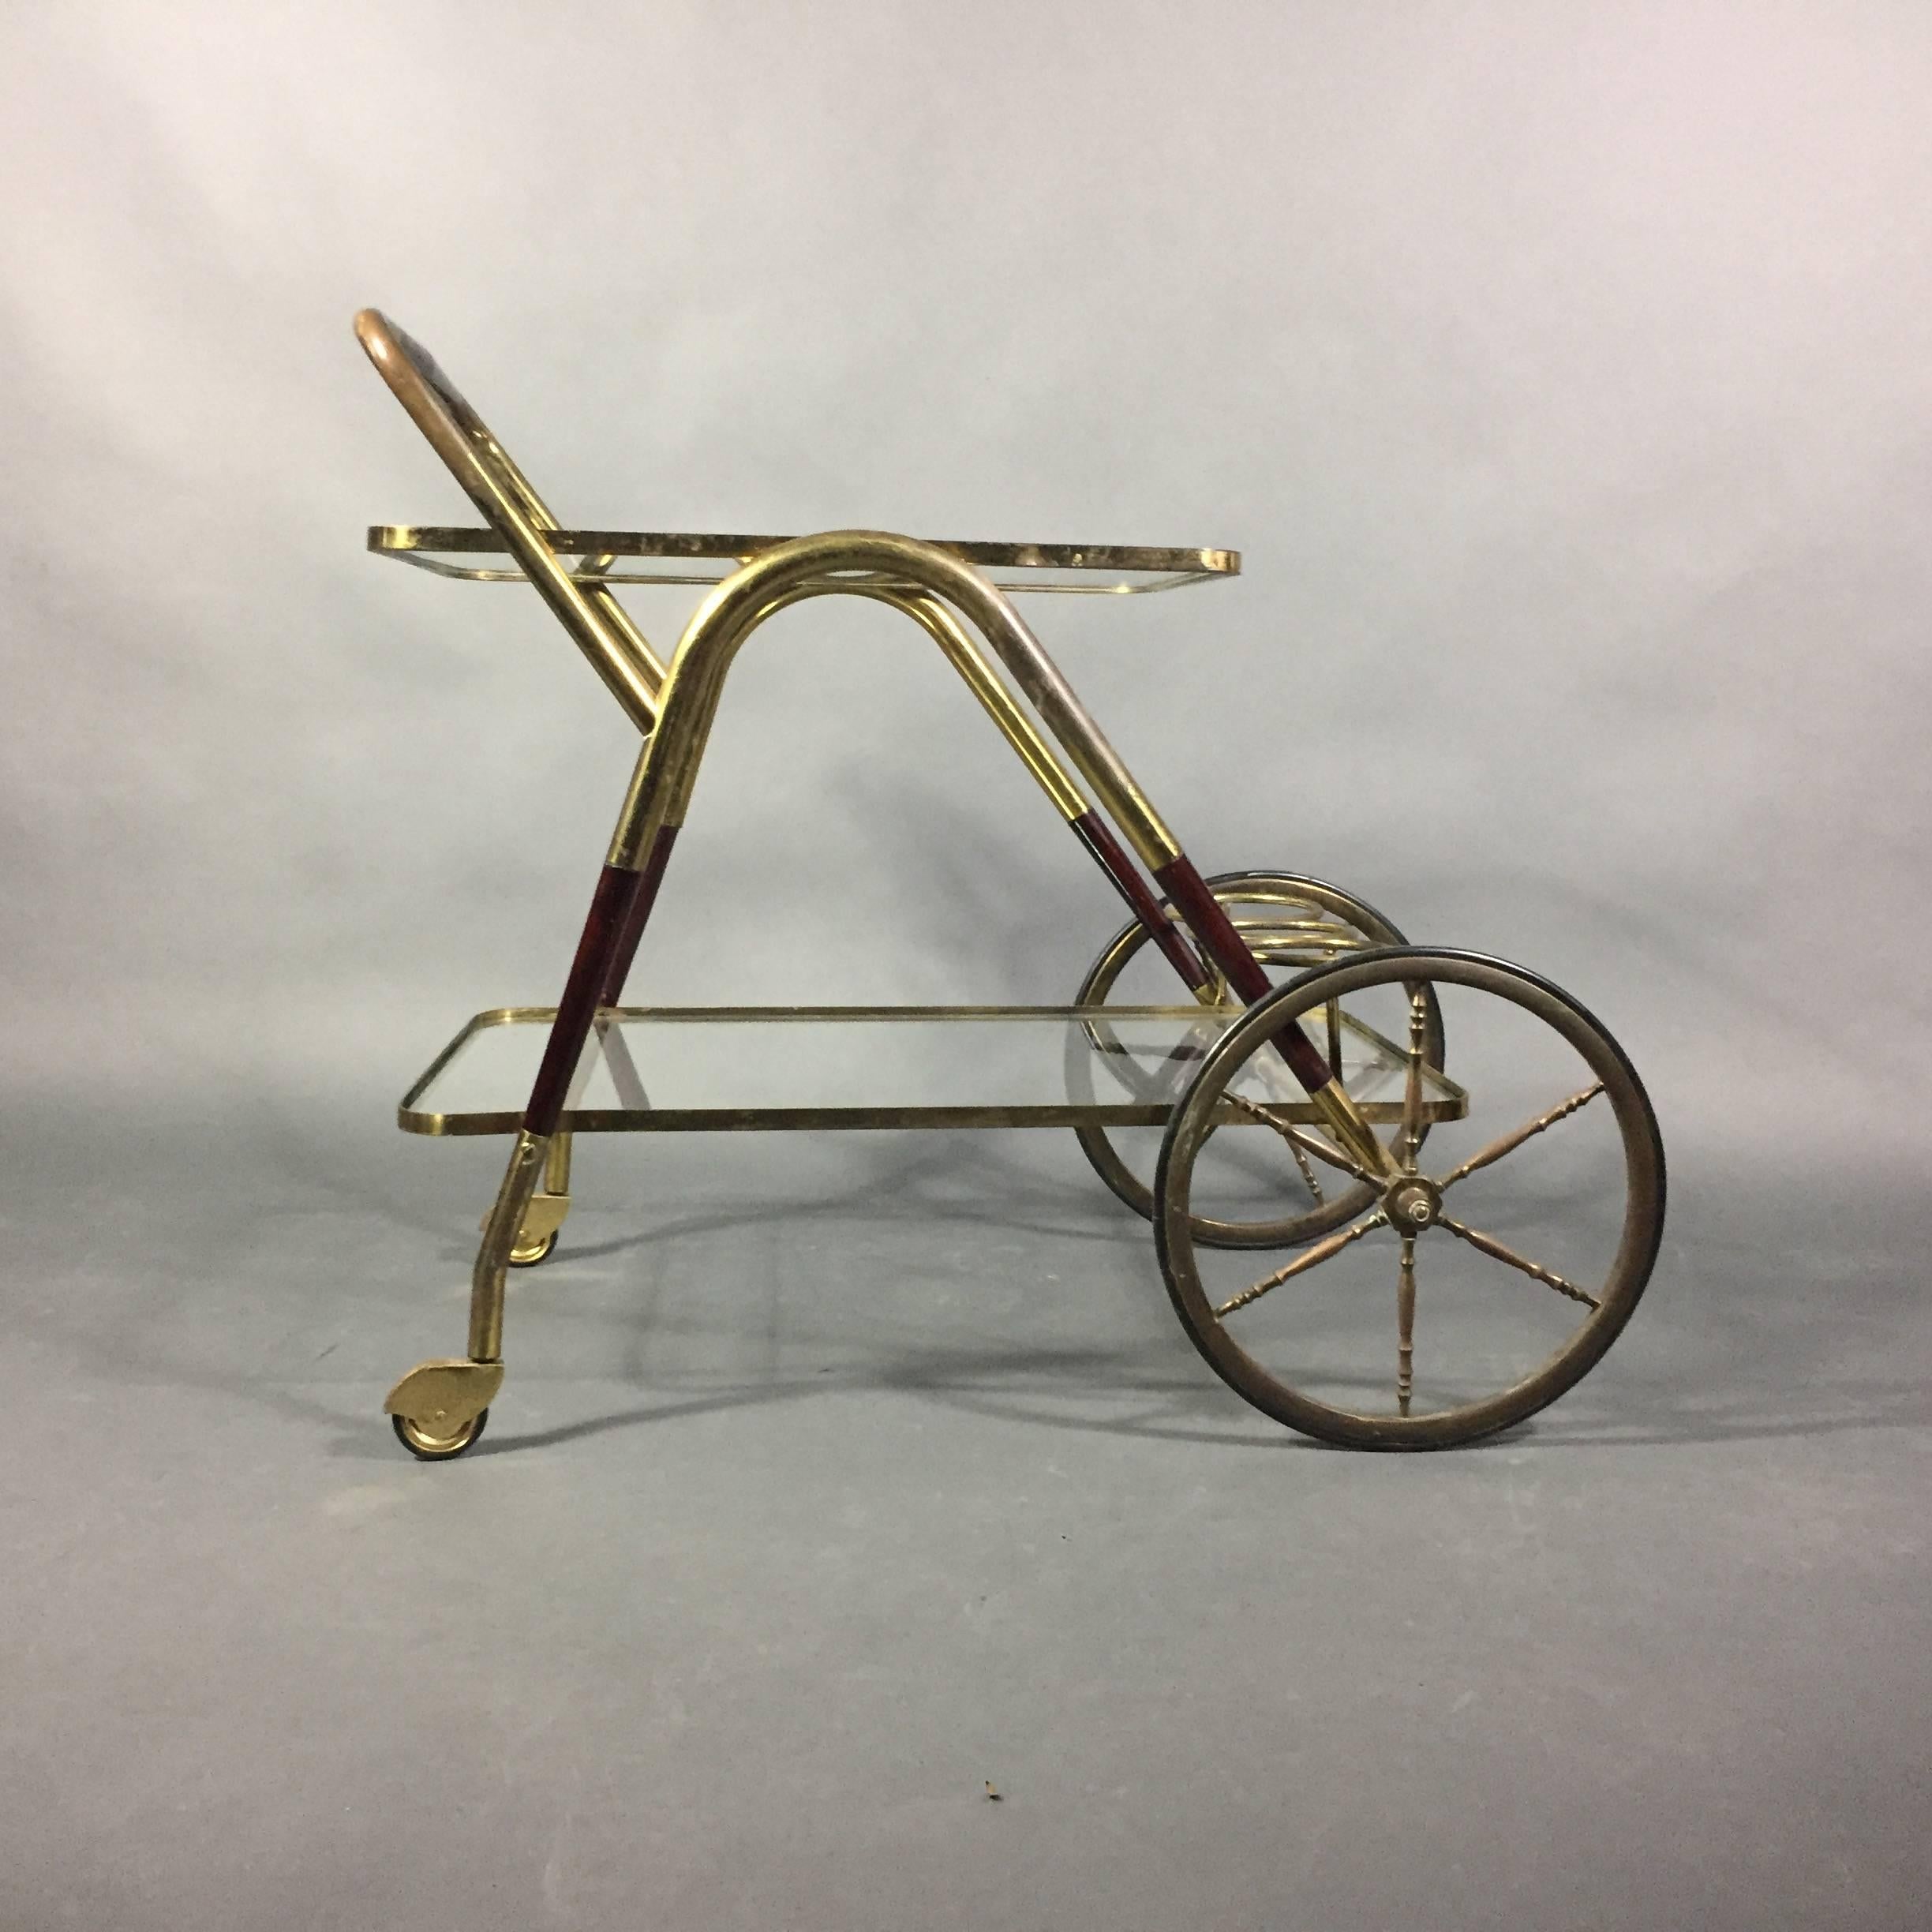 Classic Mid-Century Modern Italian drinks cart from the late 1950s or early 1960s that is perfect apartment size with a small glass top over lower full-glass shelf containing three bottle holders. Frame is in brass with portions designed in carved